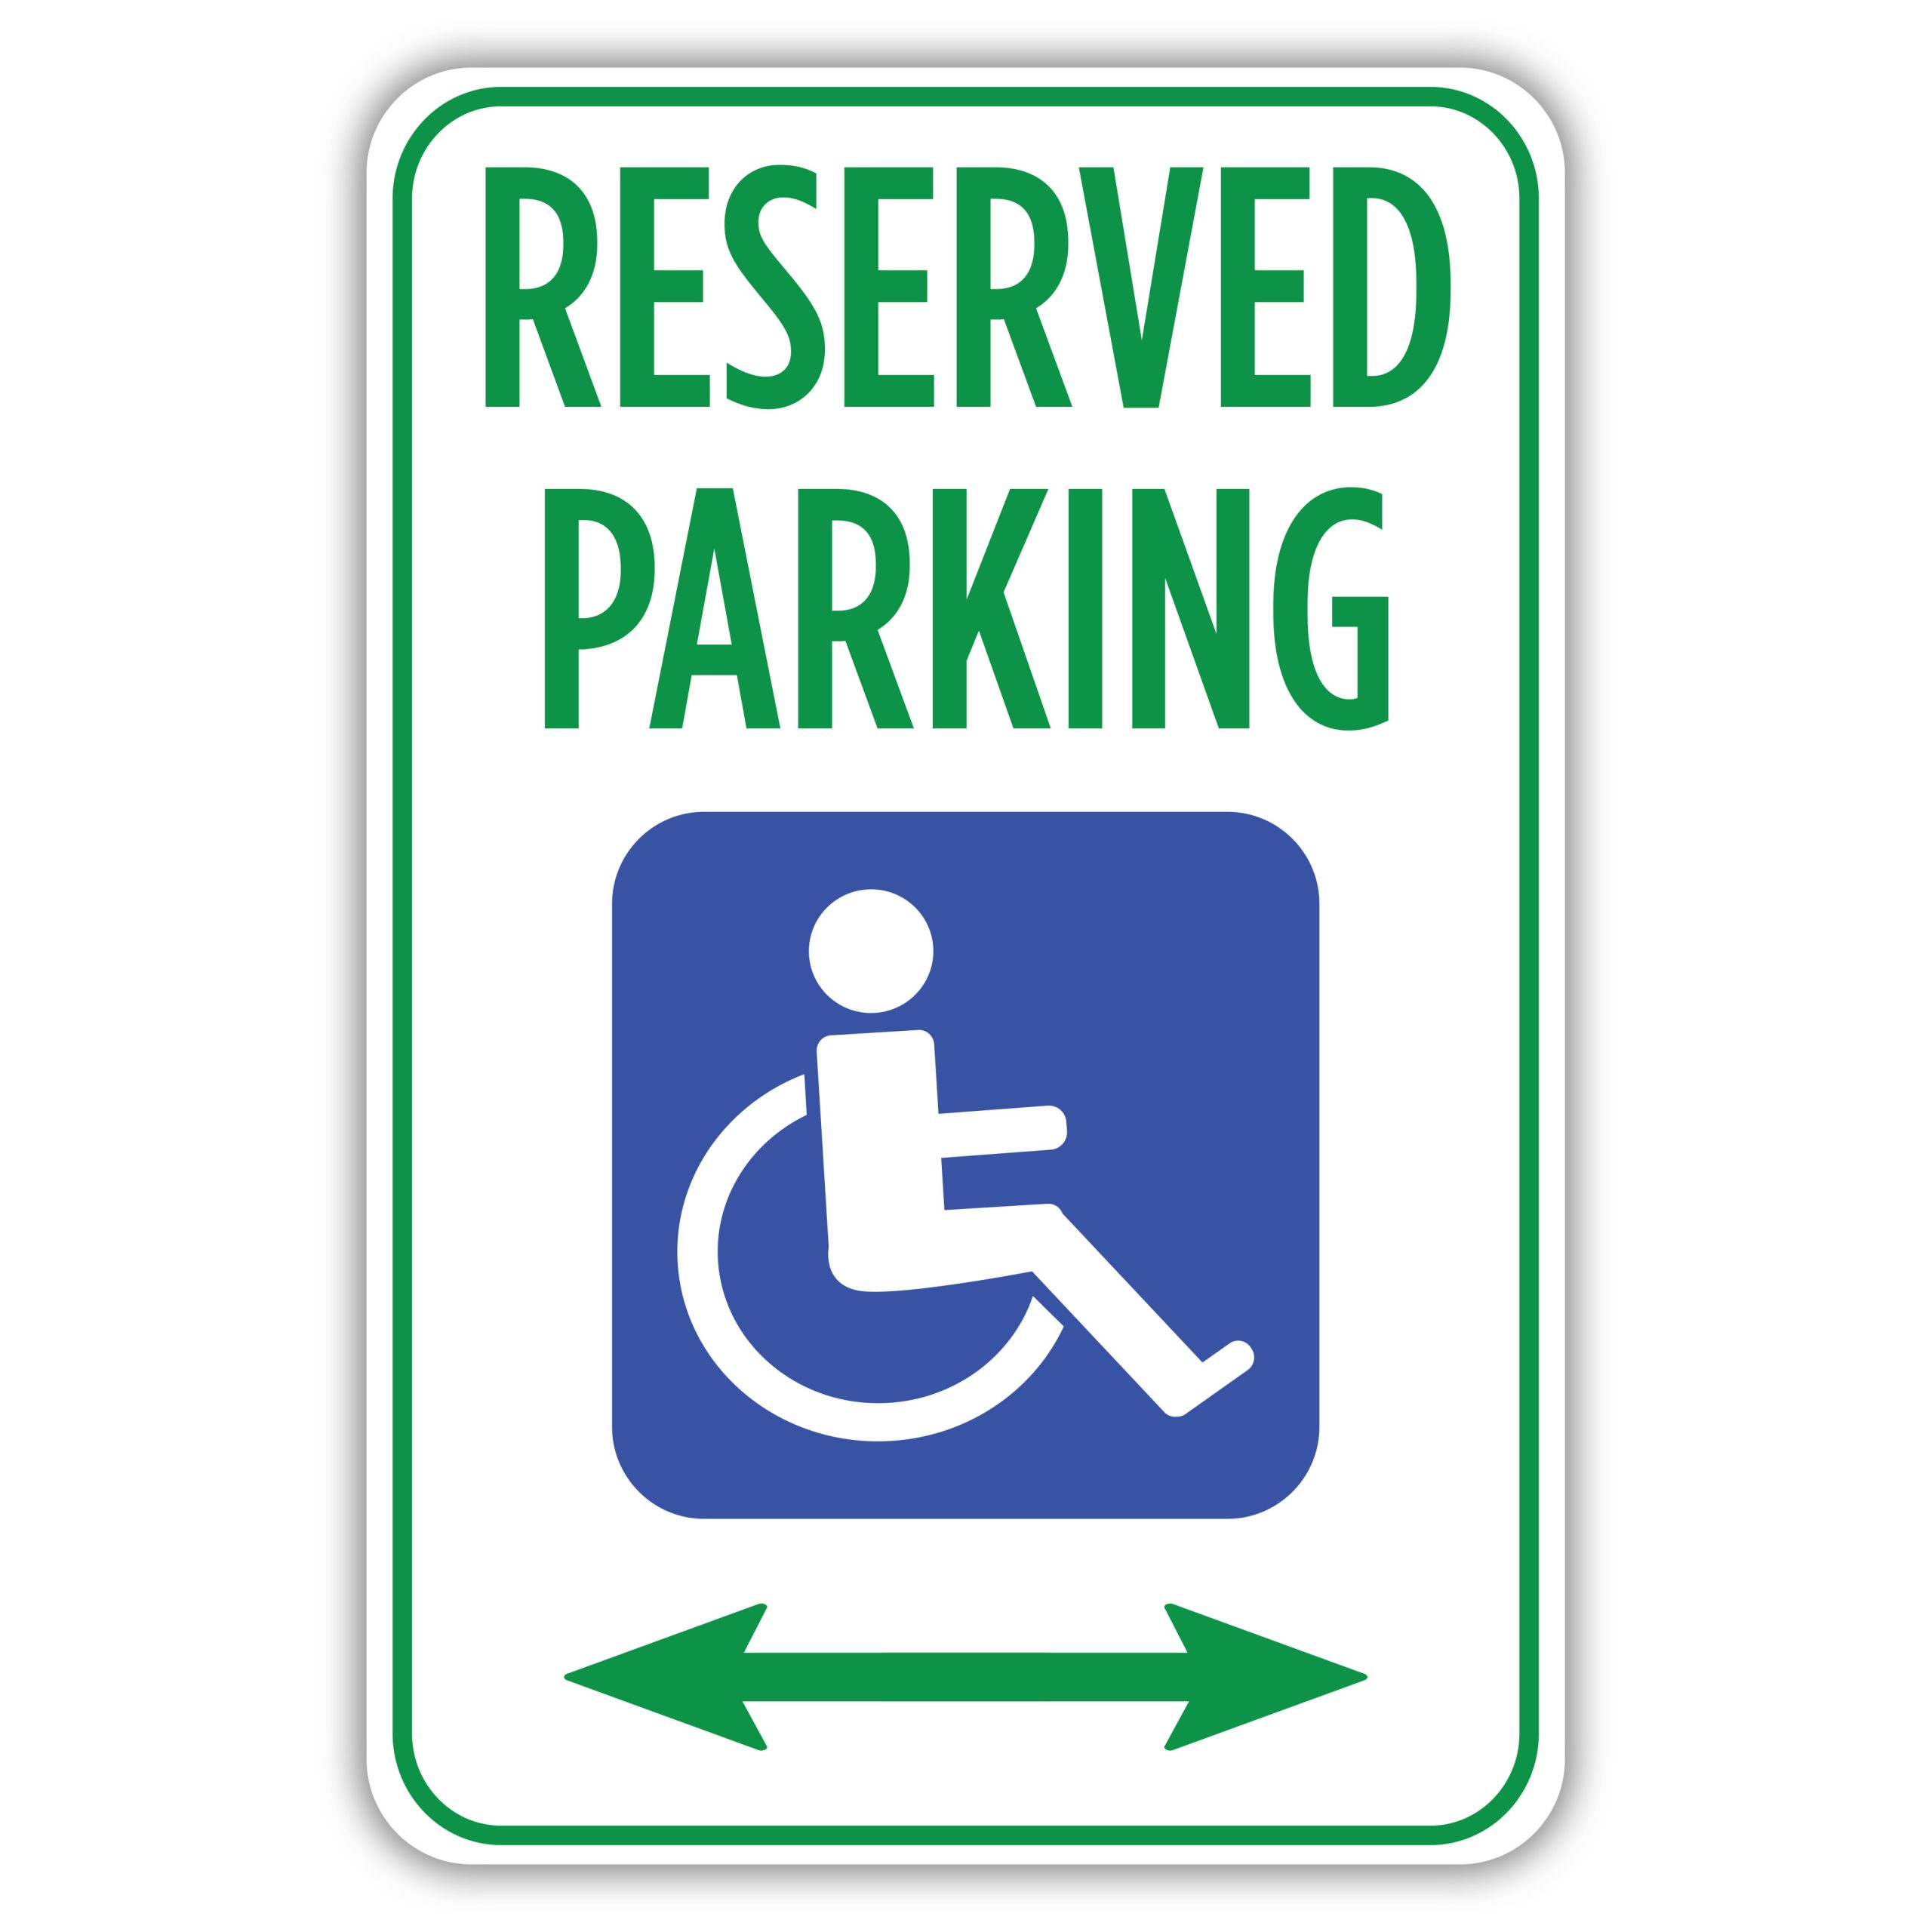 RESERVED PARKING HANDICAPPED - American Sign Company